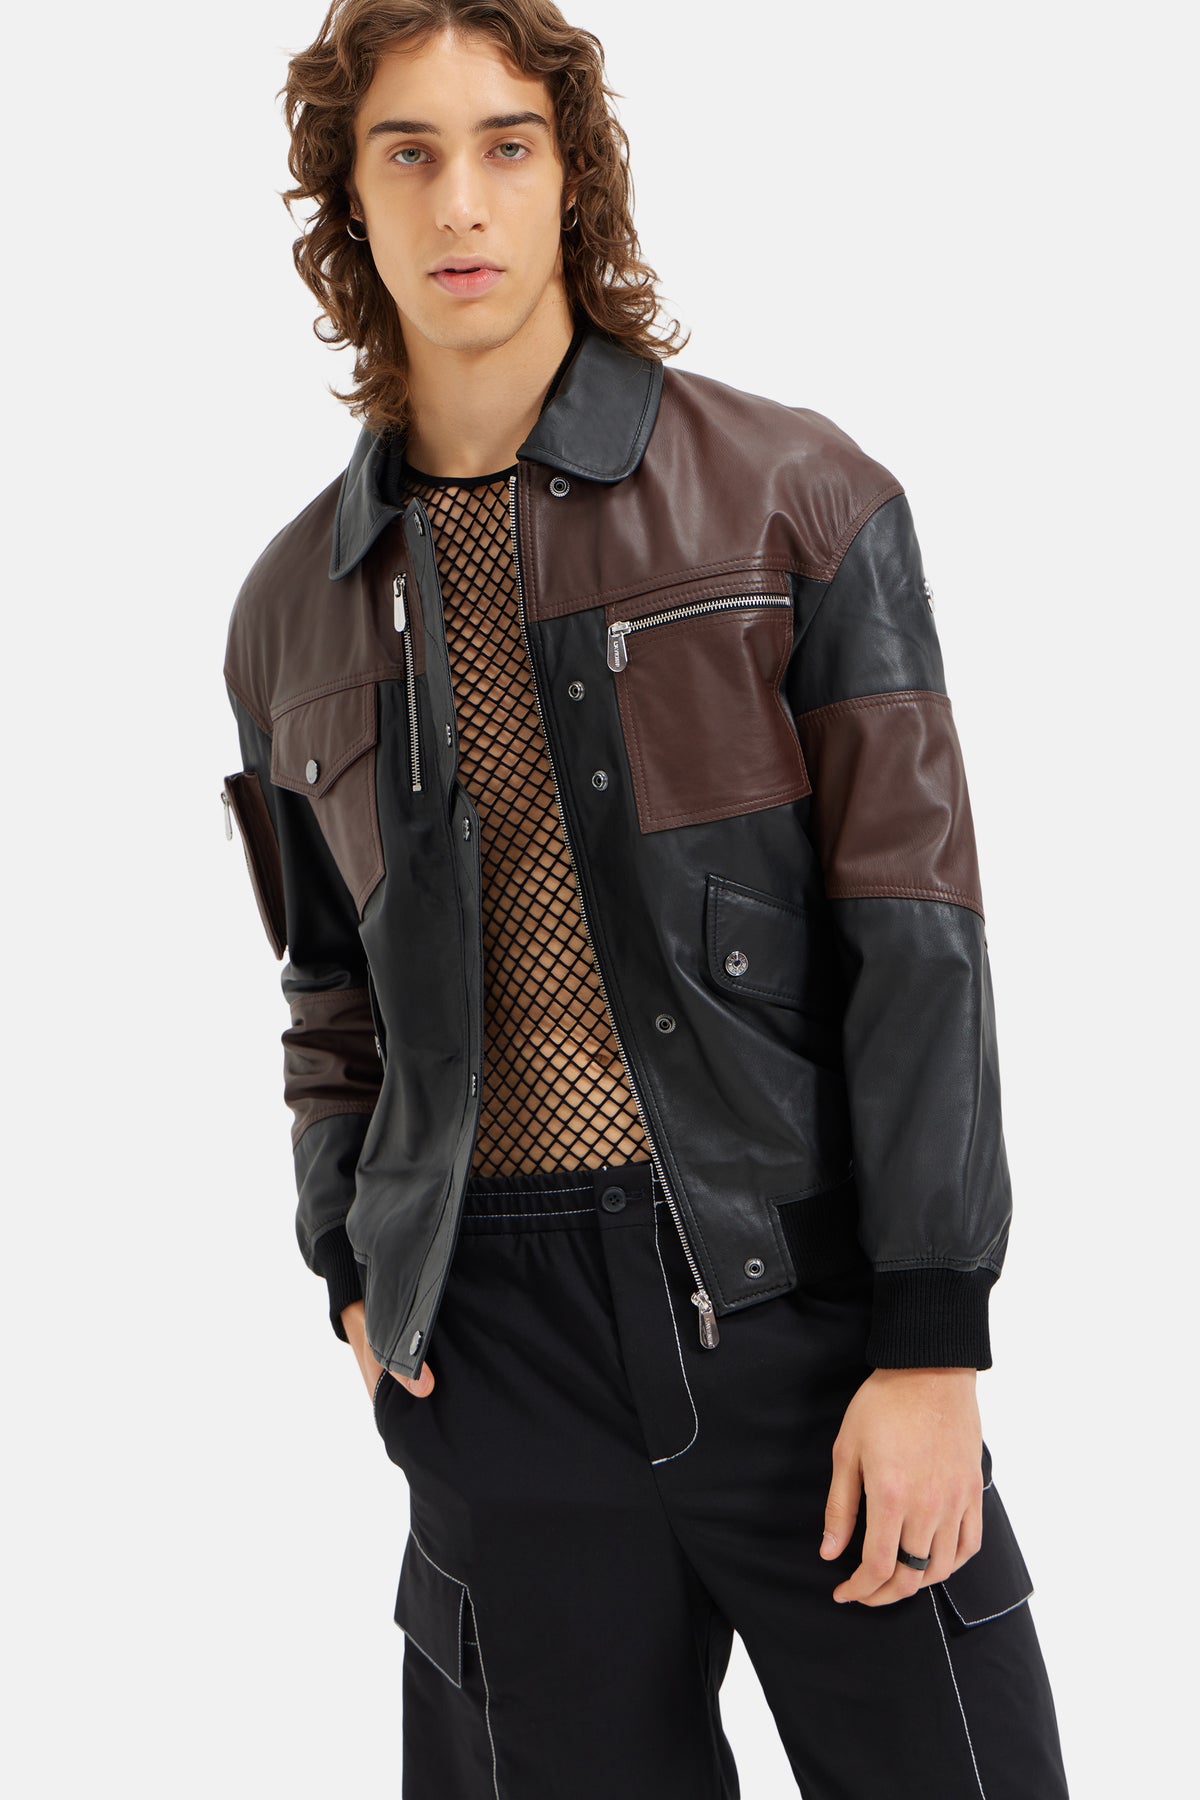 Kage - Leather Technical Jacket - Brown & Black